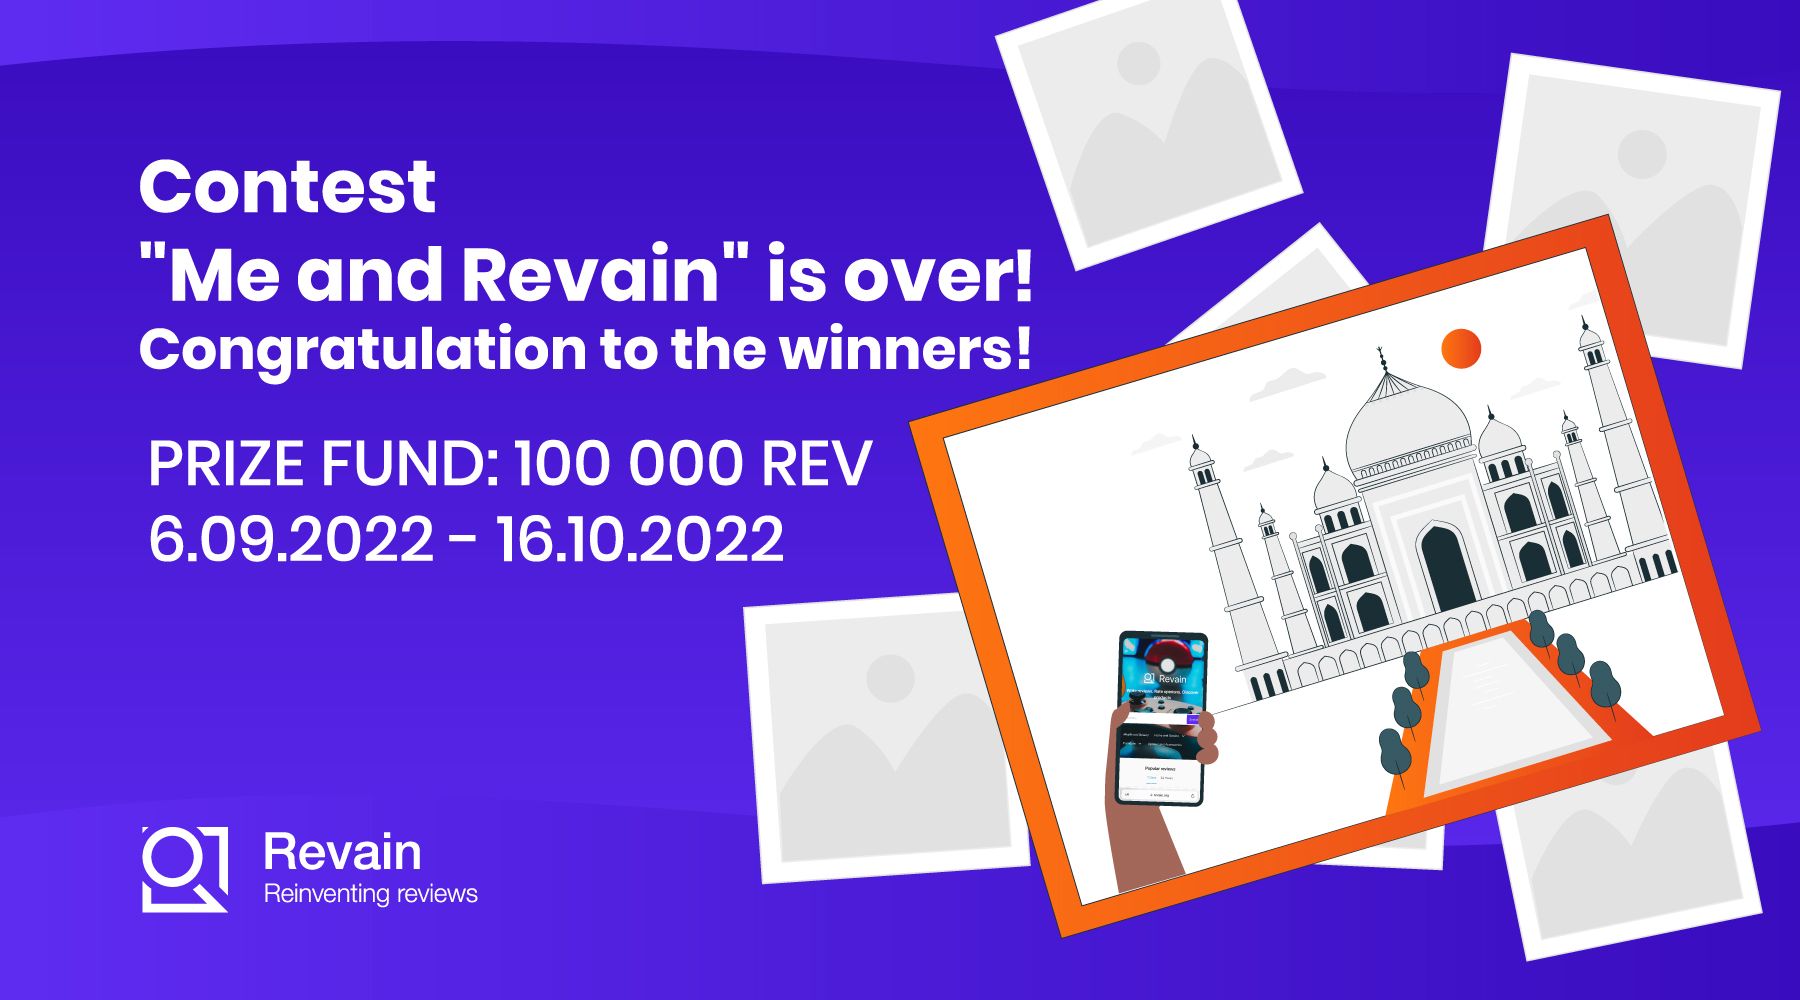 Article The photo contest "Me and Revain!" is over!